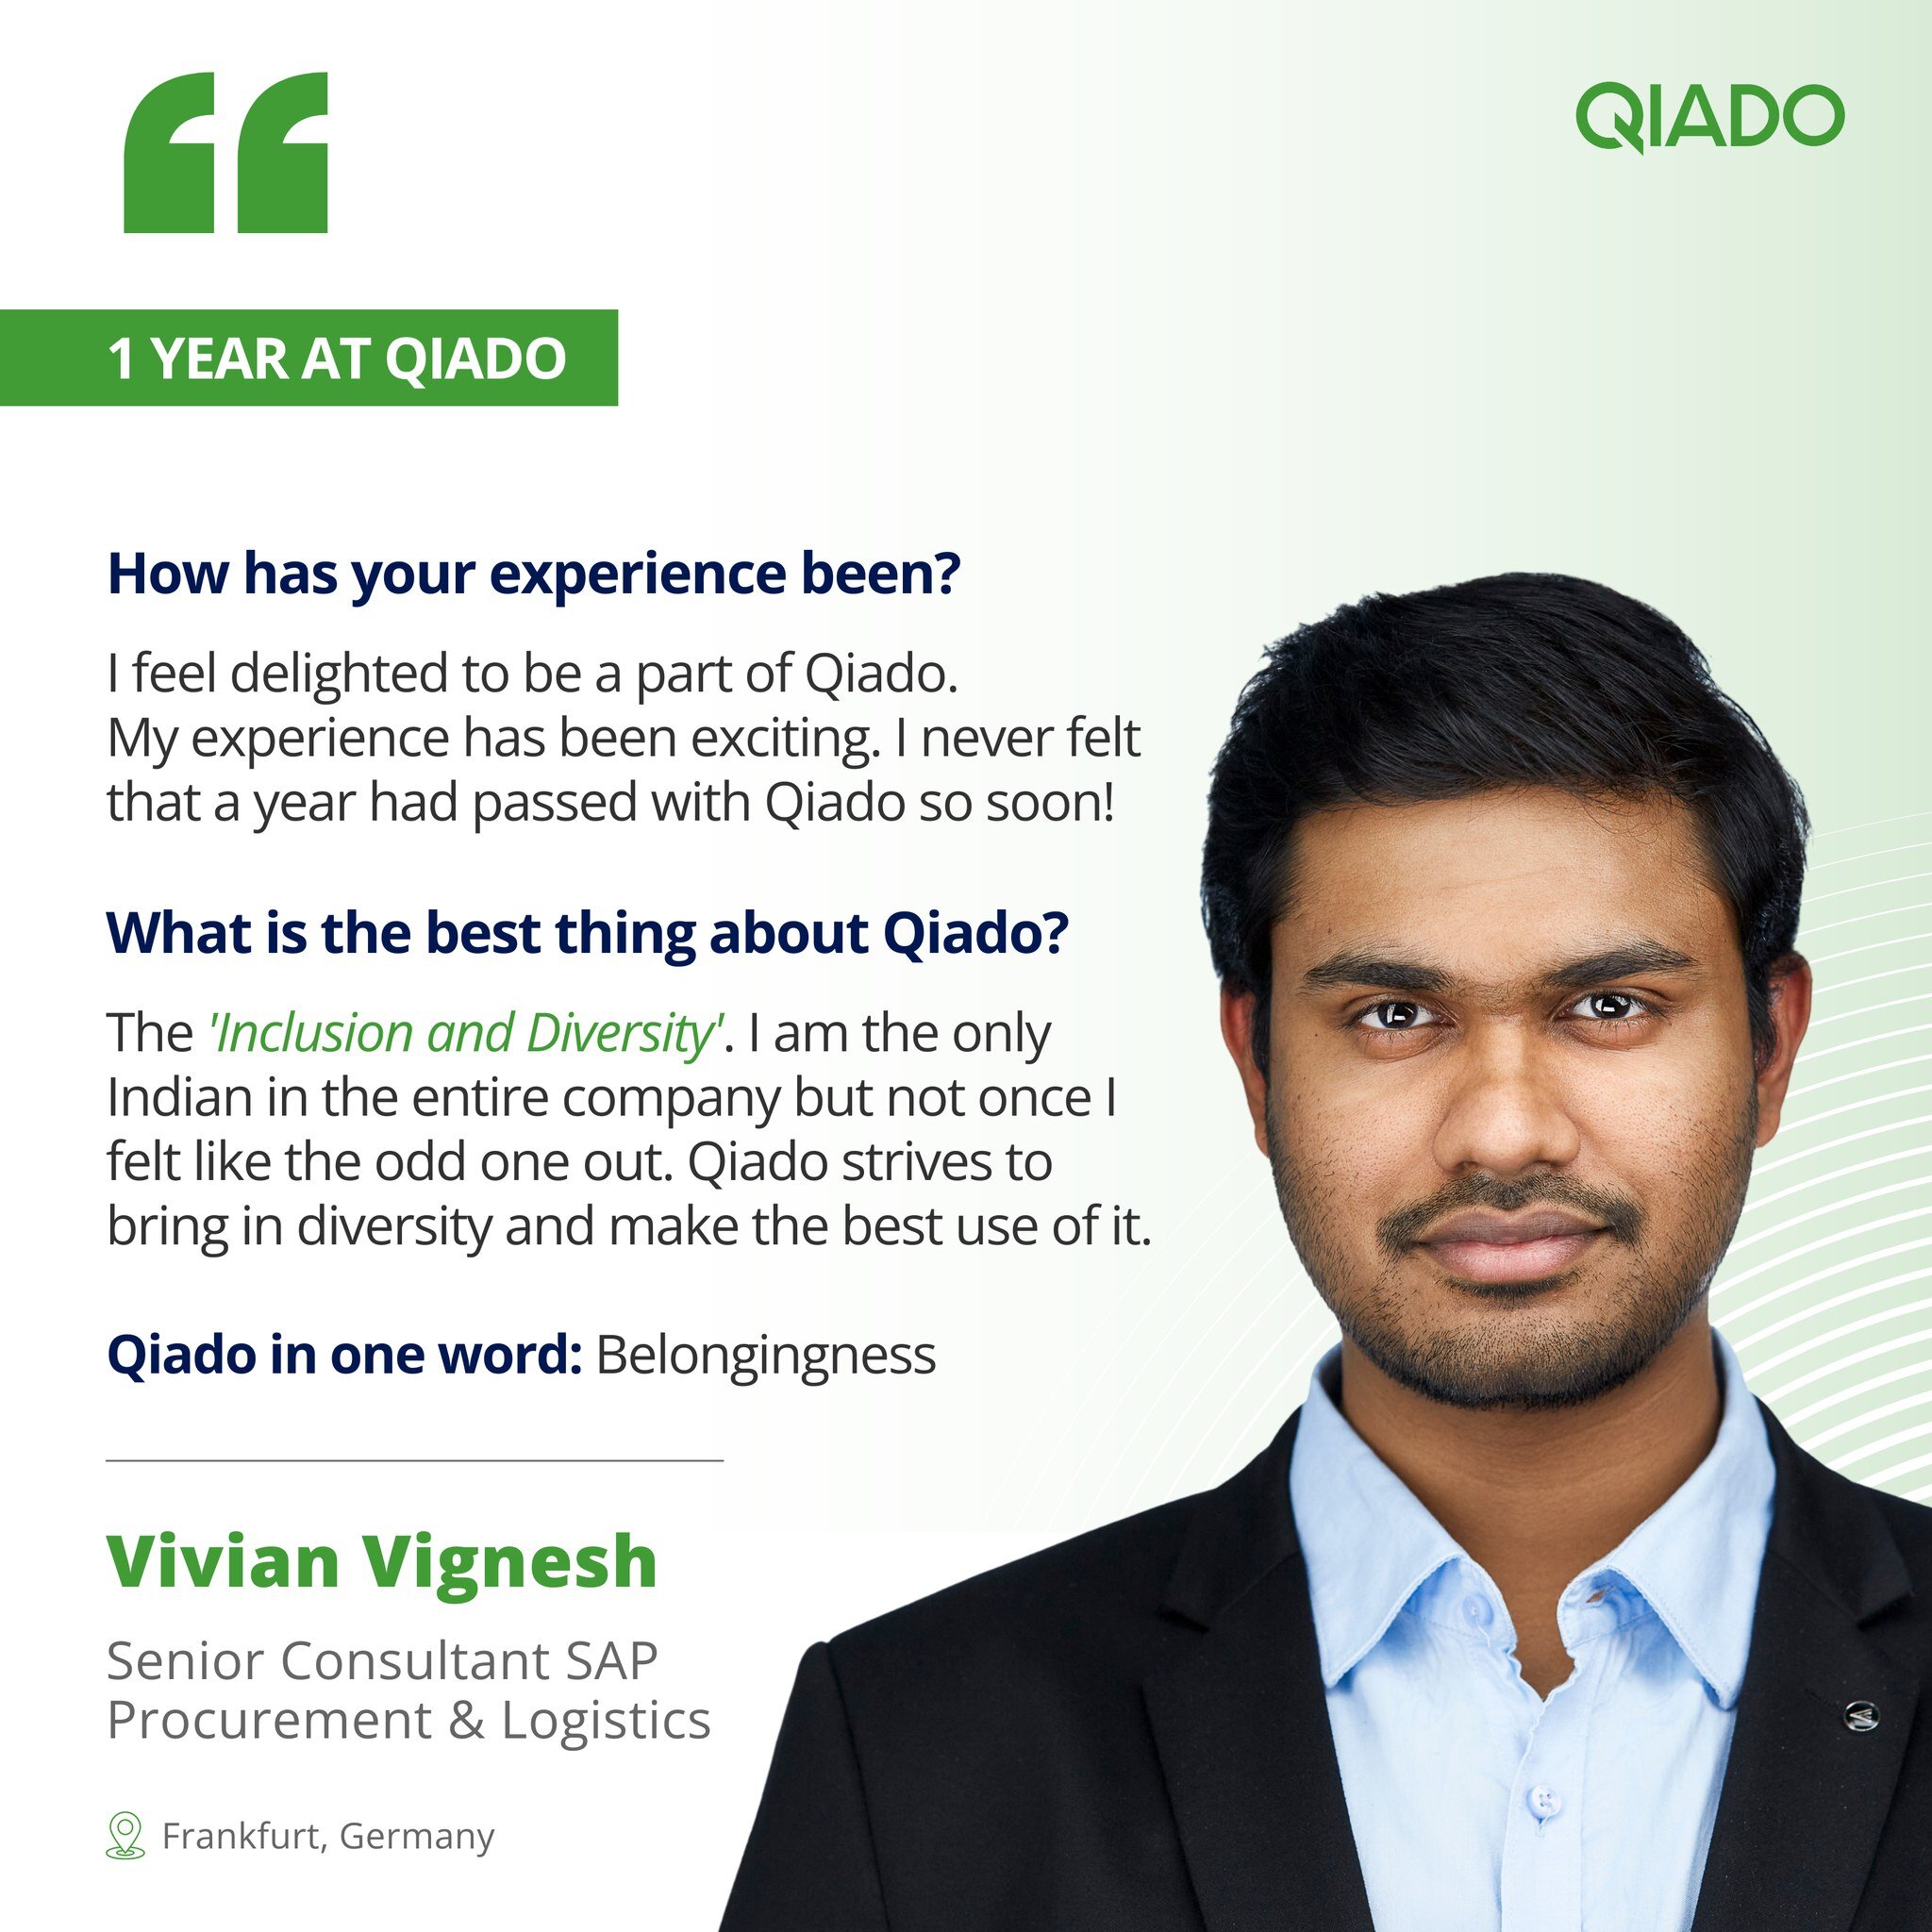 We are delighted to celebrate Vivian Vignesh first year-anniversary at Qiado 🎉 Based in #Frankfurt, Vivian has proven to be an exceptional team player, demonstrating unwavering dedication and expertise in every aspect of his role. 

His contribution